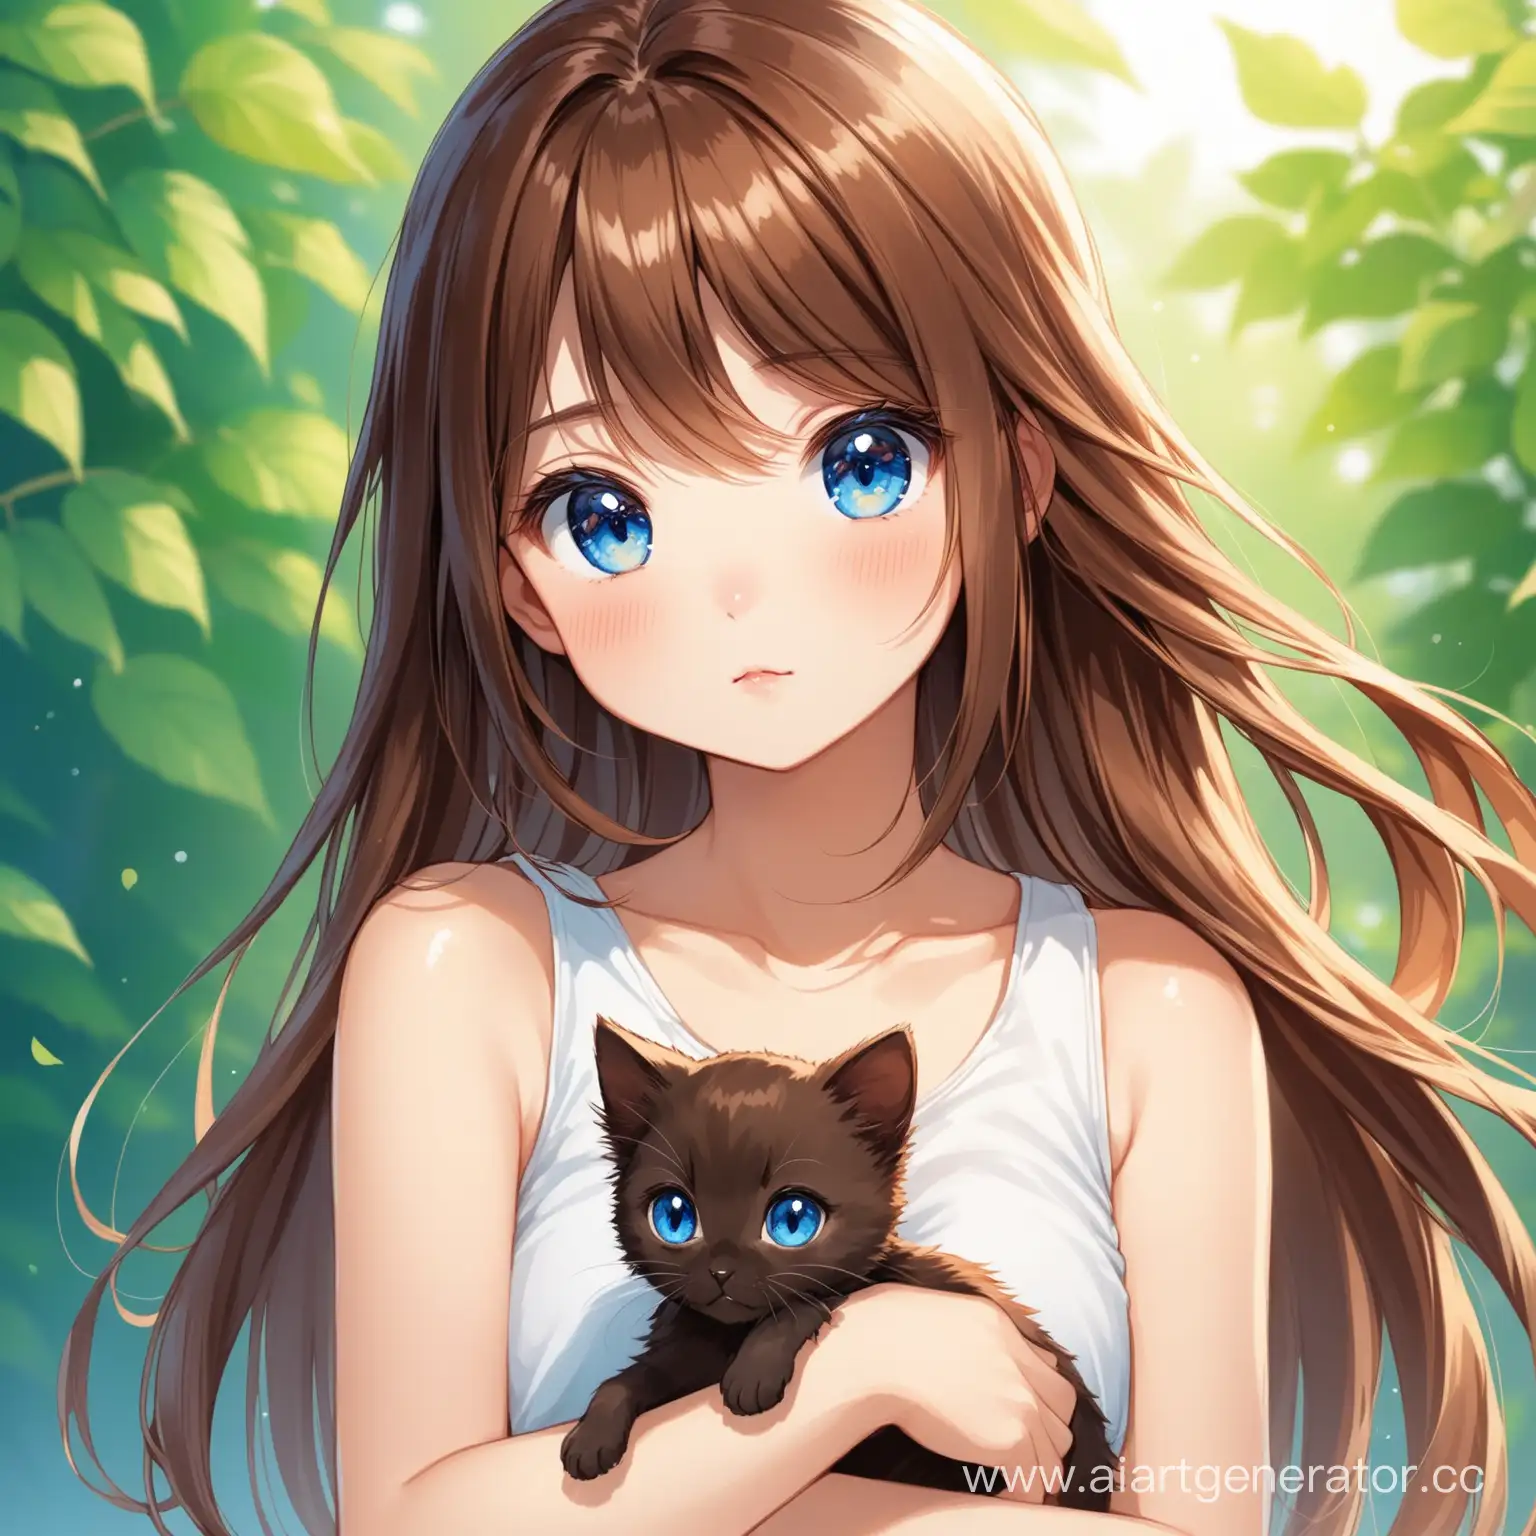 BrownEyed-Girl-Holding-Black-and-BlueEyed-Kitten-in-White-Tank-Top